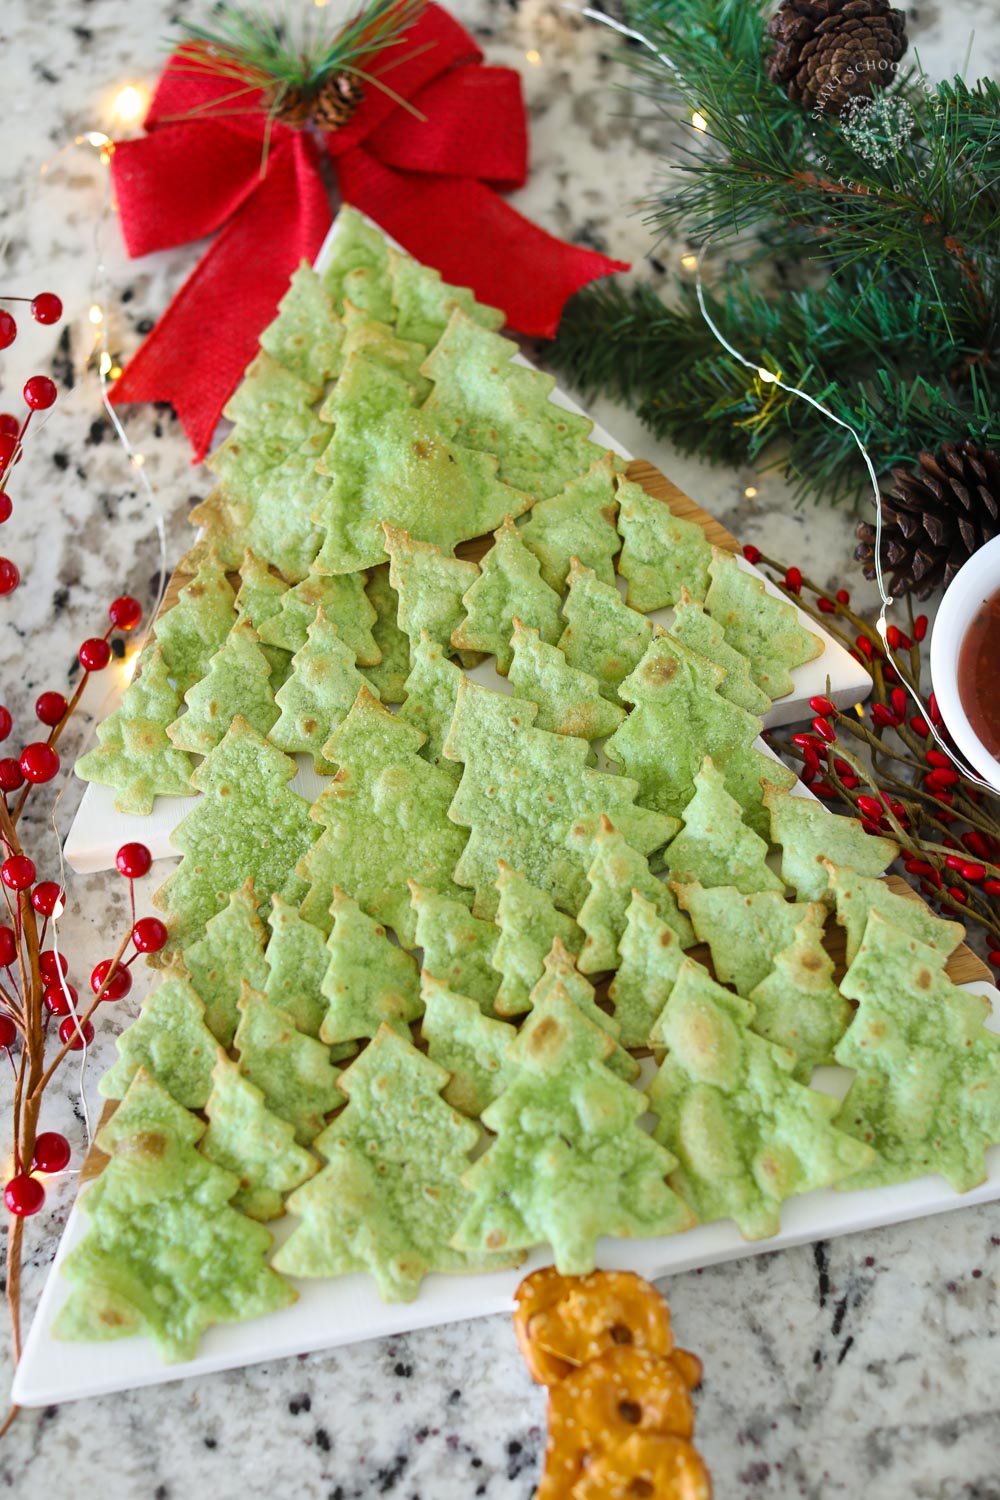 Everything about these Christmas Tree Tortilla Chips is fun! They are not only adorable, the crunchy little trees dress up any dish or platter for the holidays.